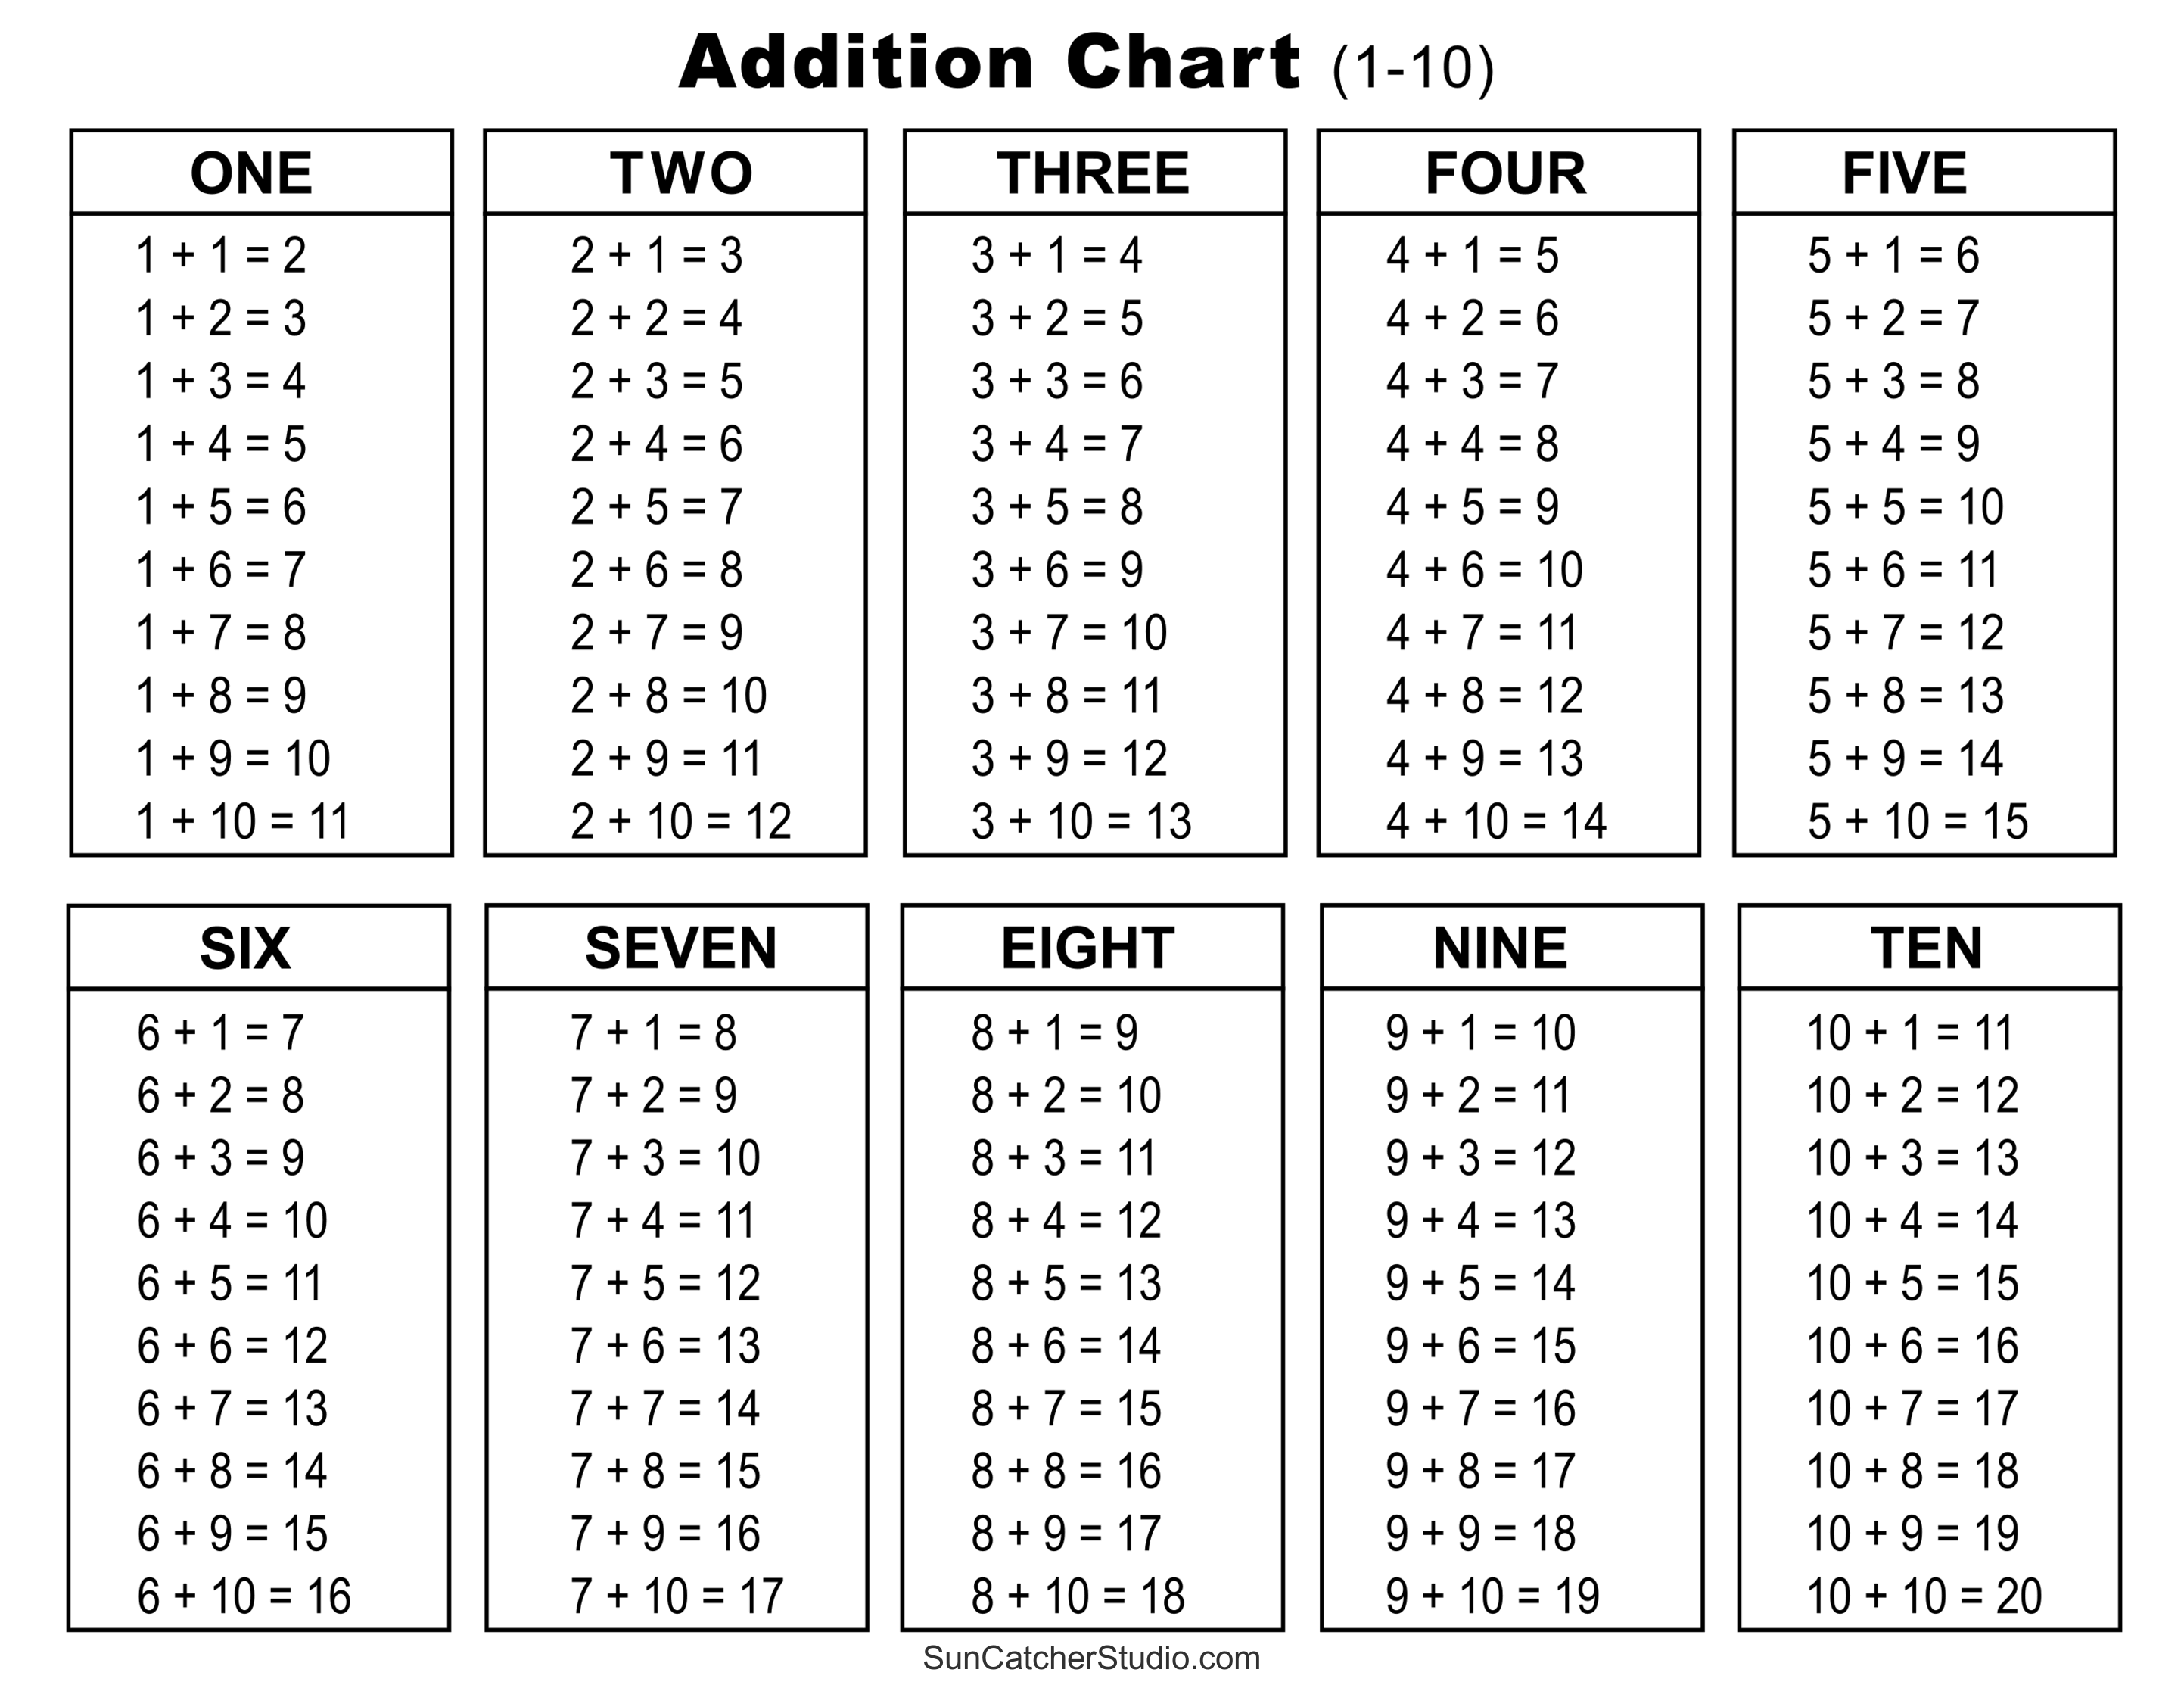 Addition Charts Tables Worksheets Free Printable PDF Files DIY Projects Patterns